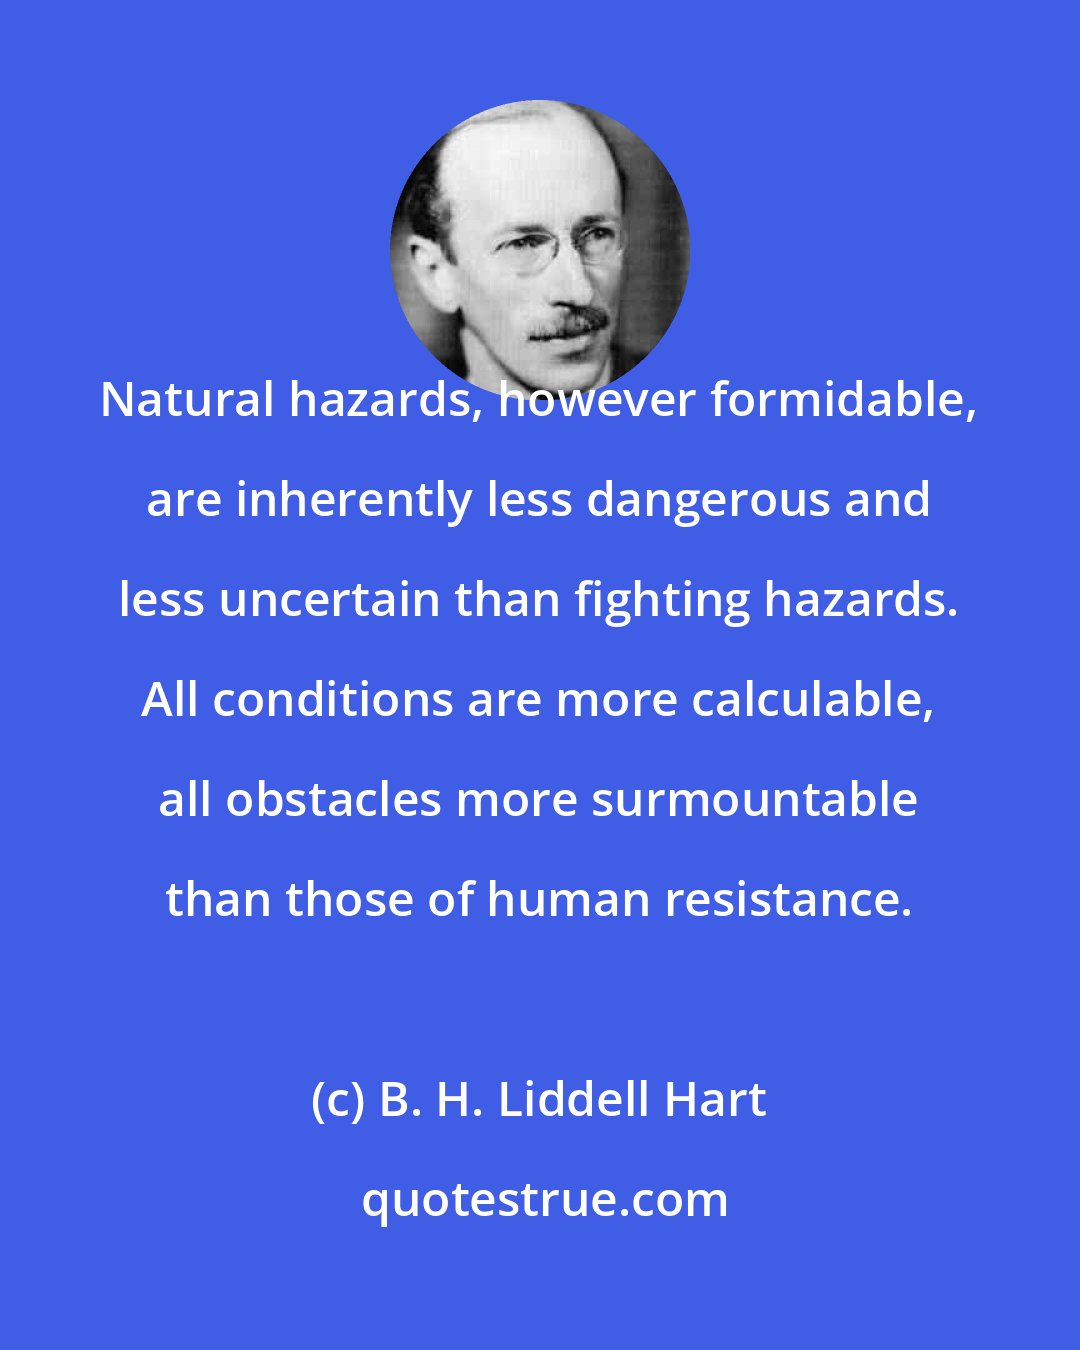 B. H. Liddell Hart: Natural hazards, however formidable, are inherently less dangerous and less uncertain than fighting hazards. All conditions are more calculable, all obstacles more surmountable than those of human resistance.